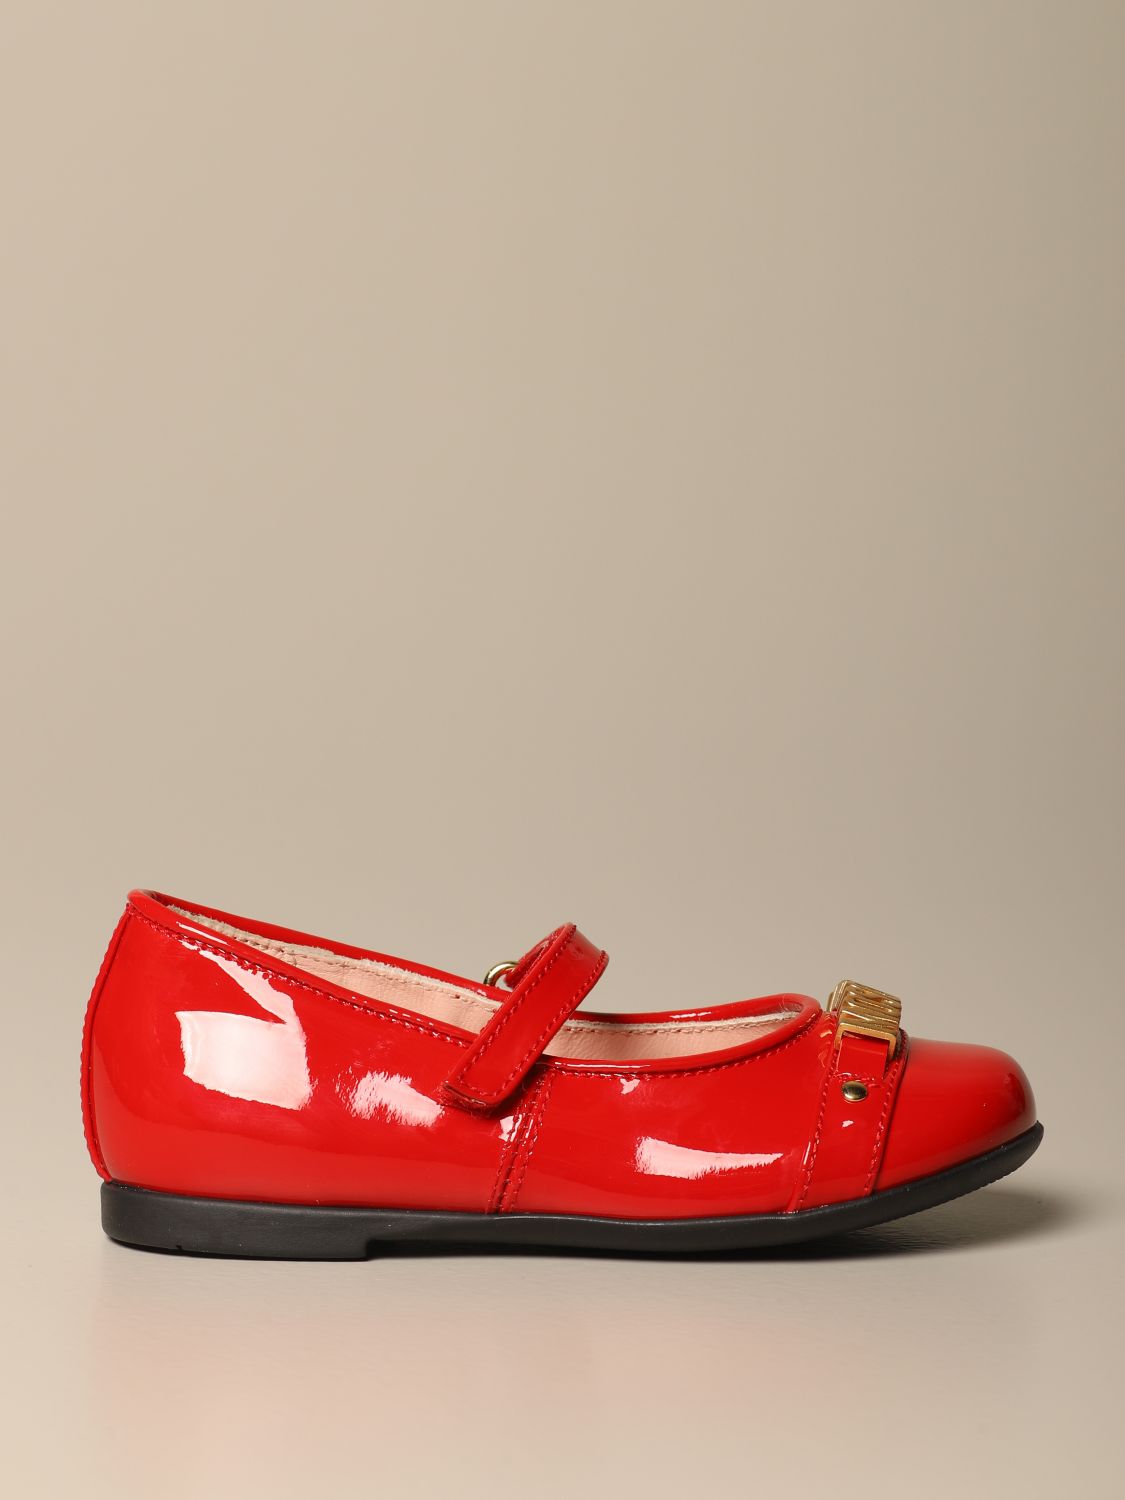 moschino red shoes